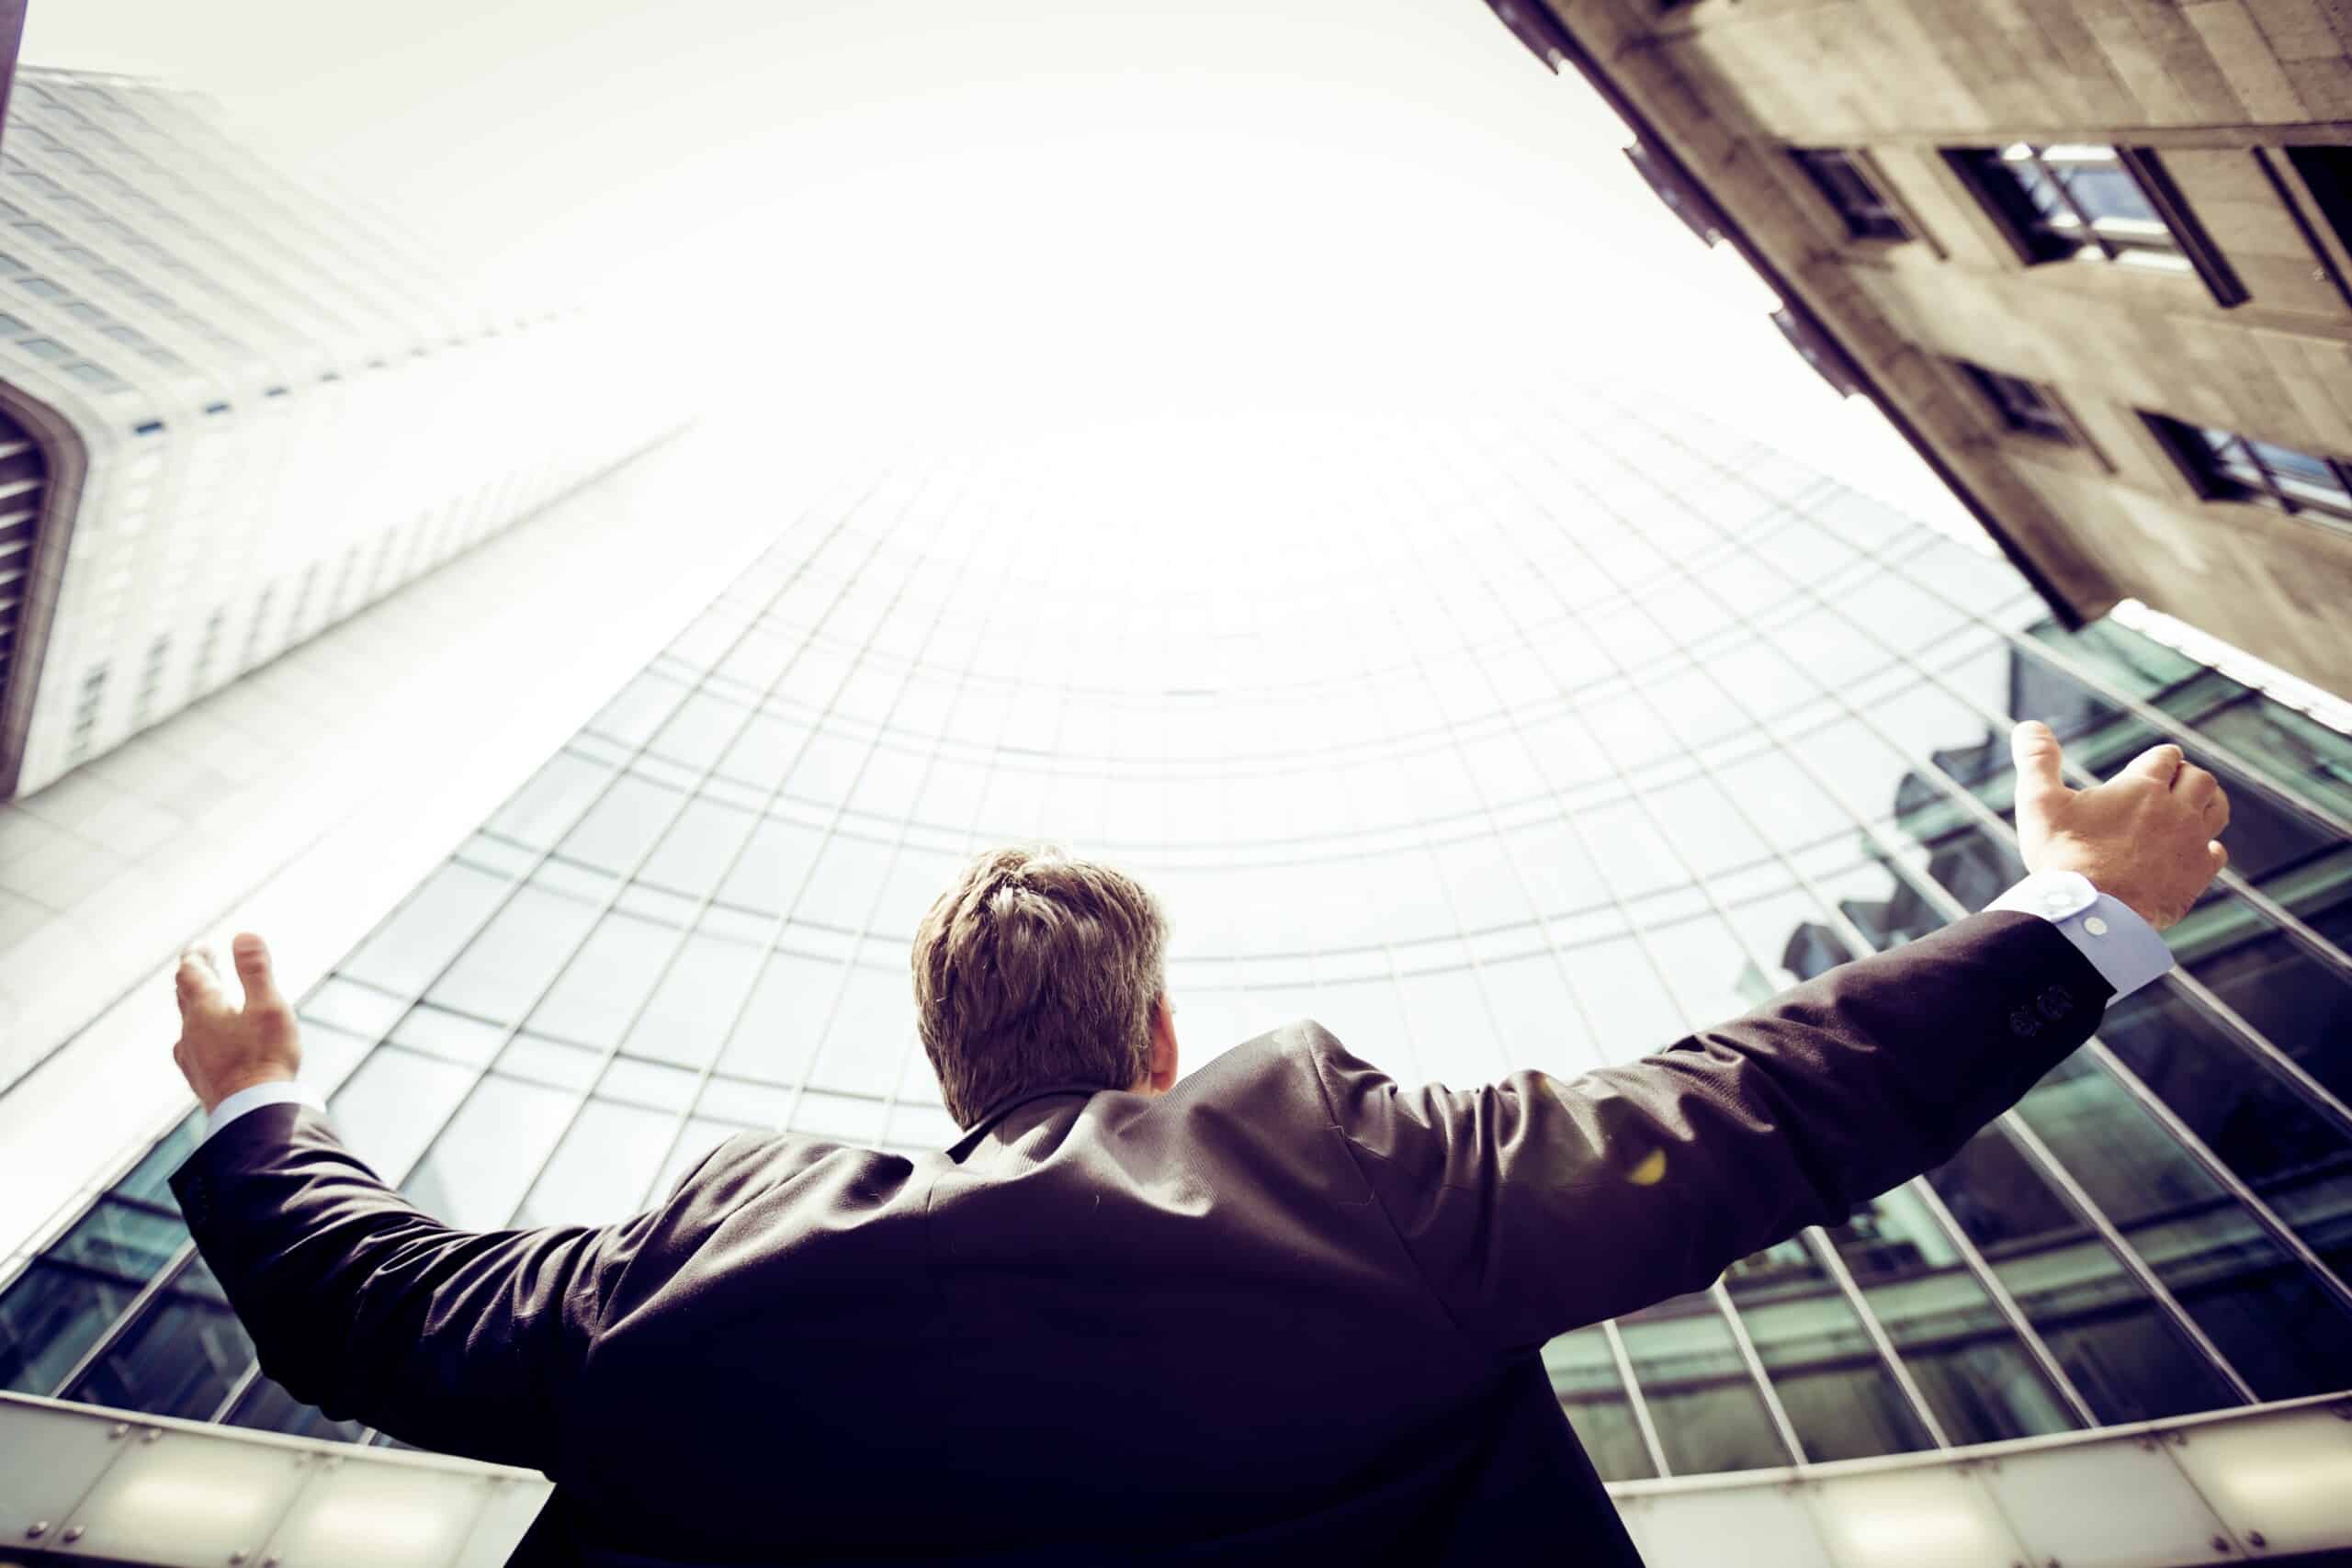 A tech businessman with his arms outstretched in front of a global company skyscraper.